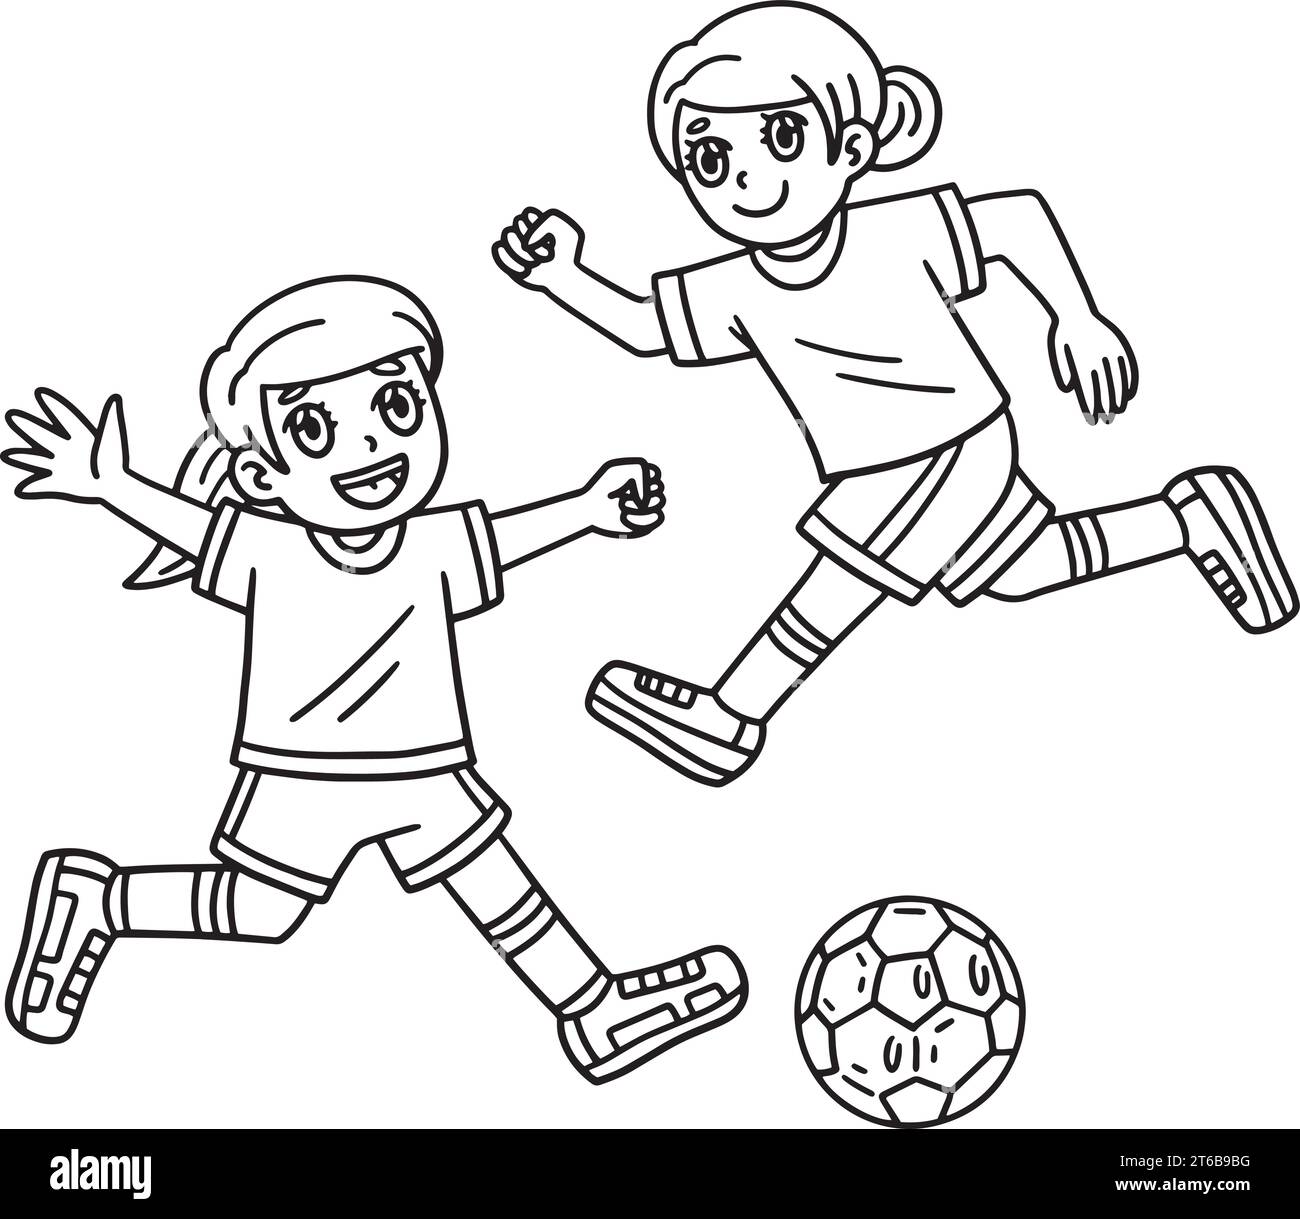 Girls Playing Soccer Isolated Coloring Page  Stock Vector